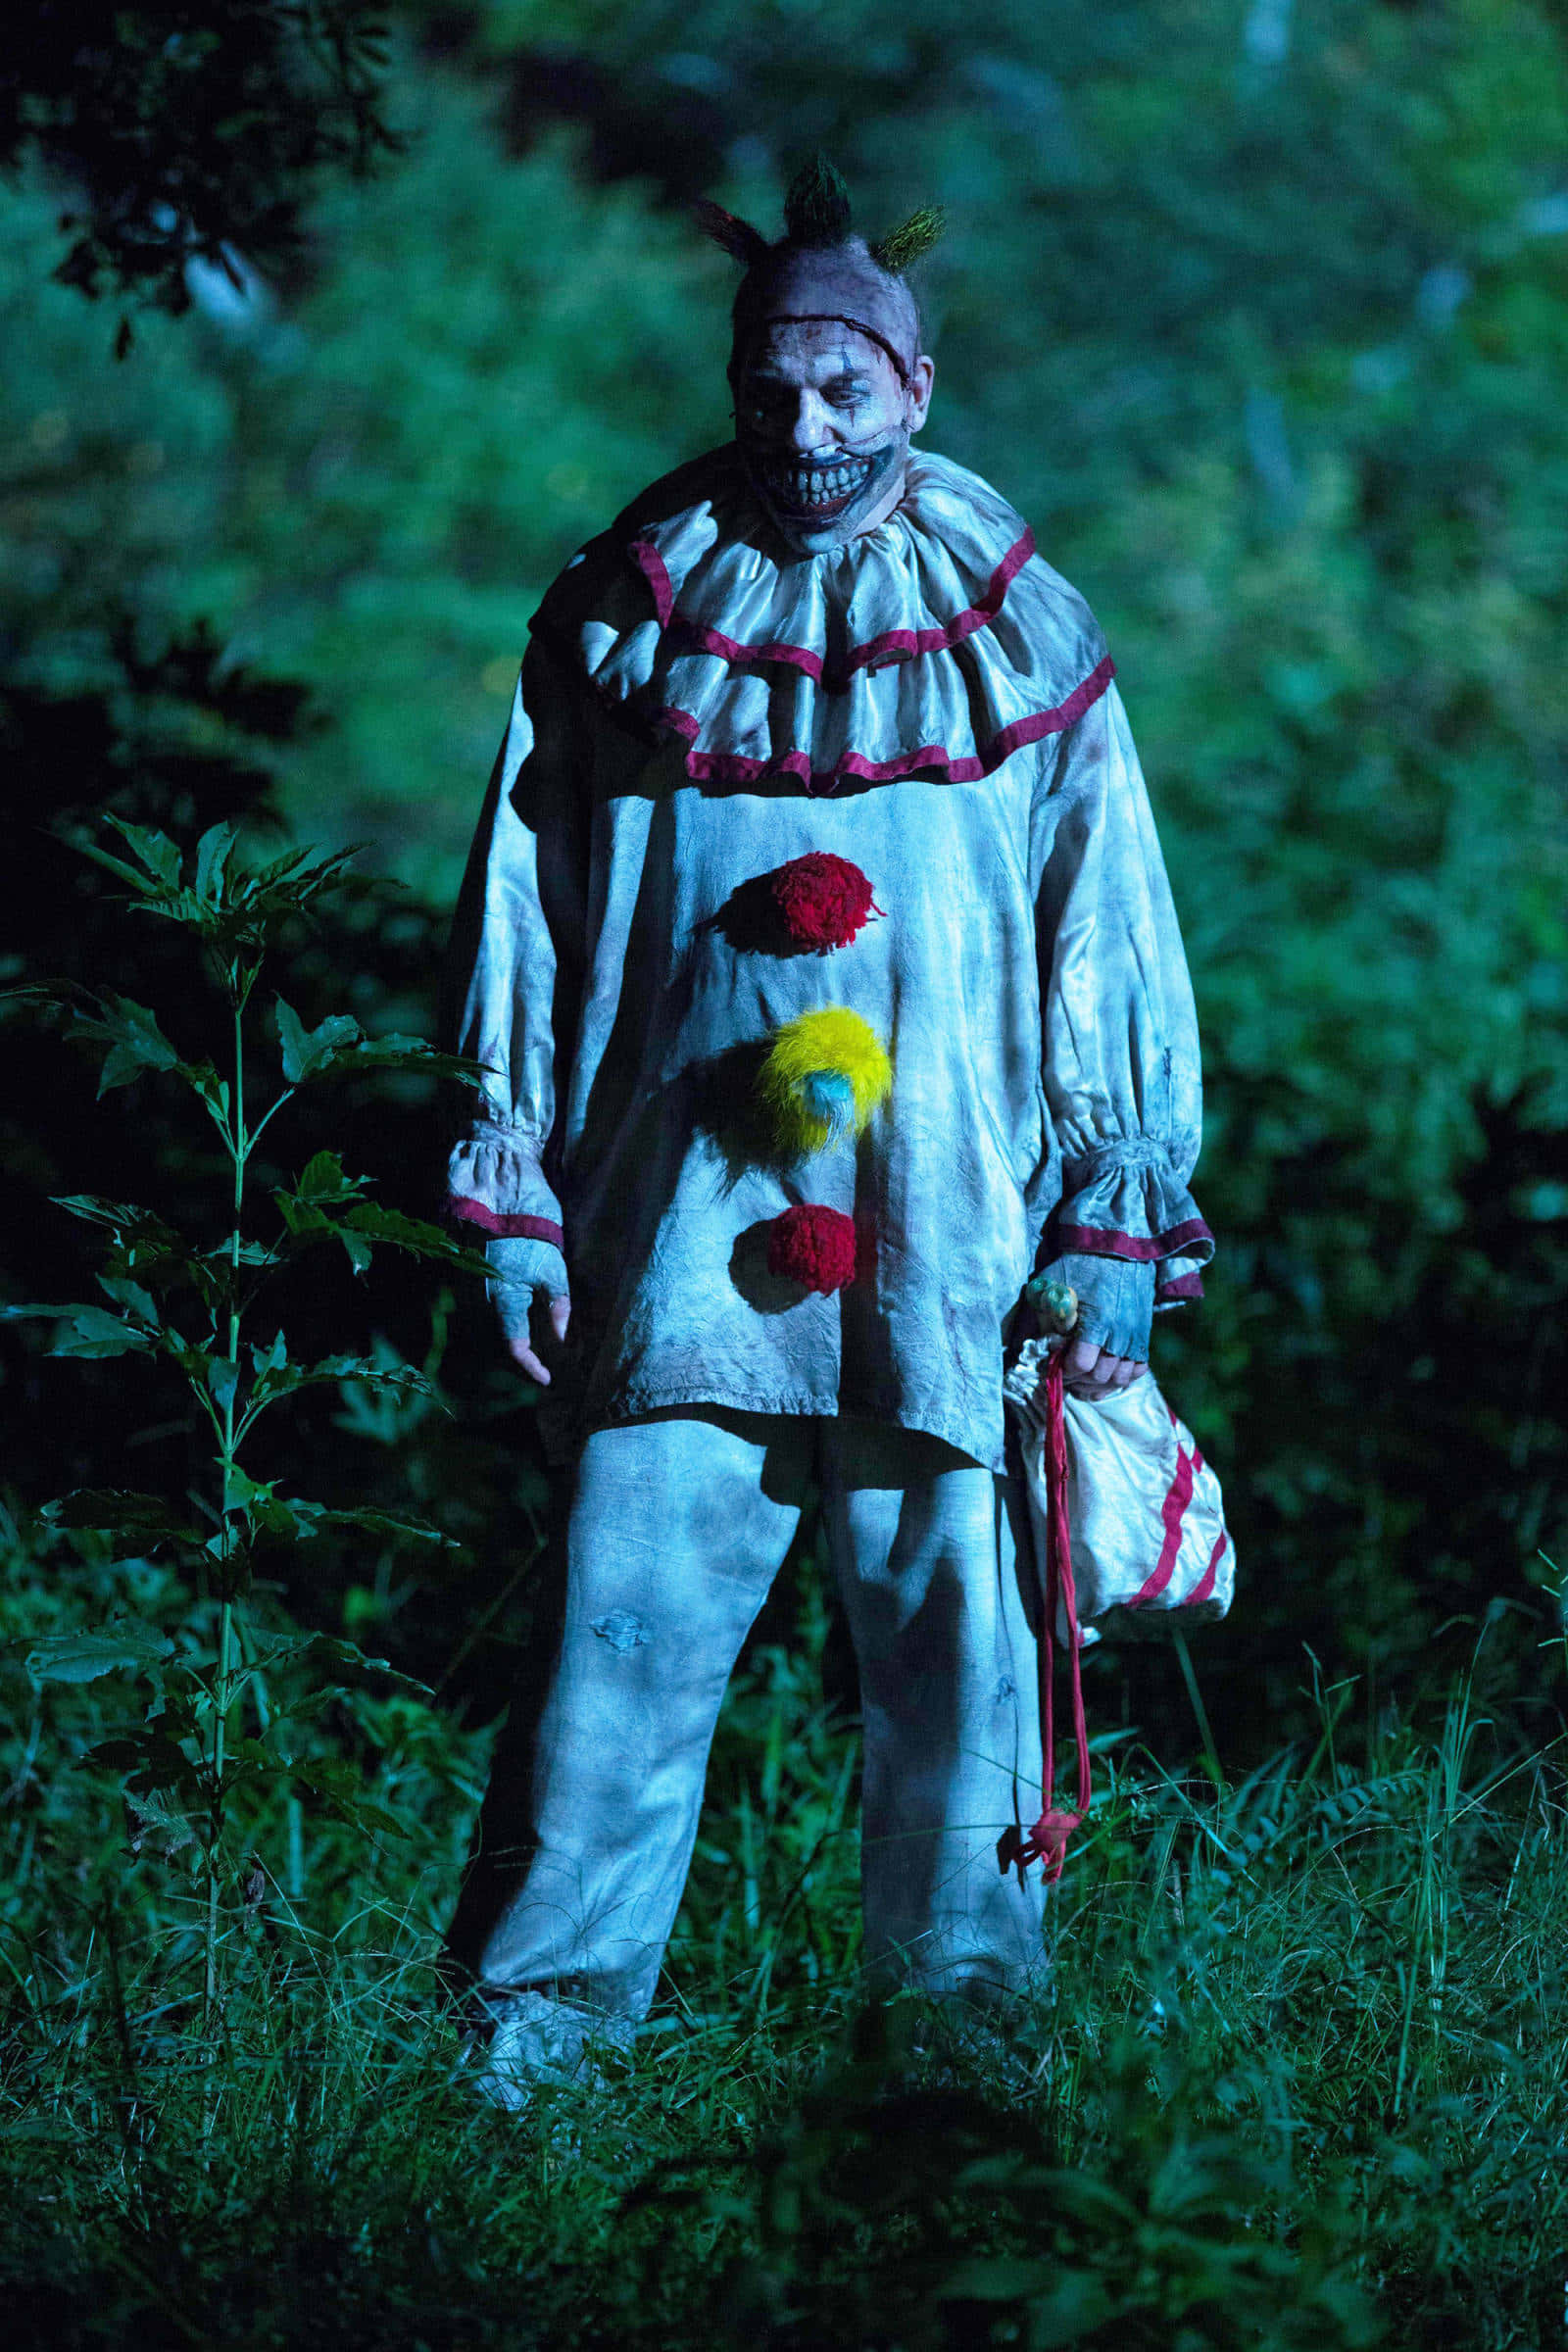 Don't get too close to this Creepy Clown